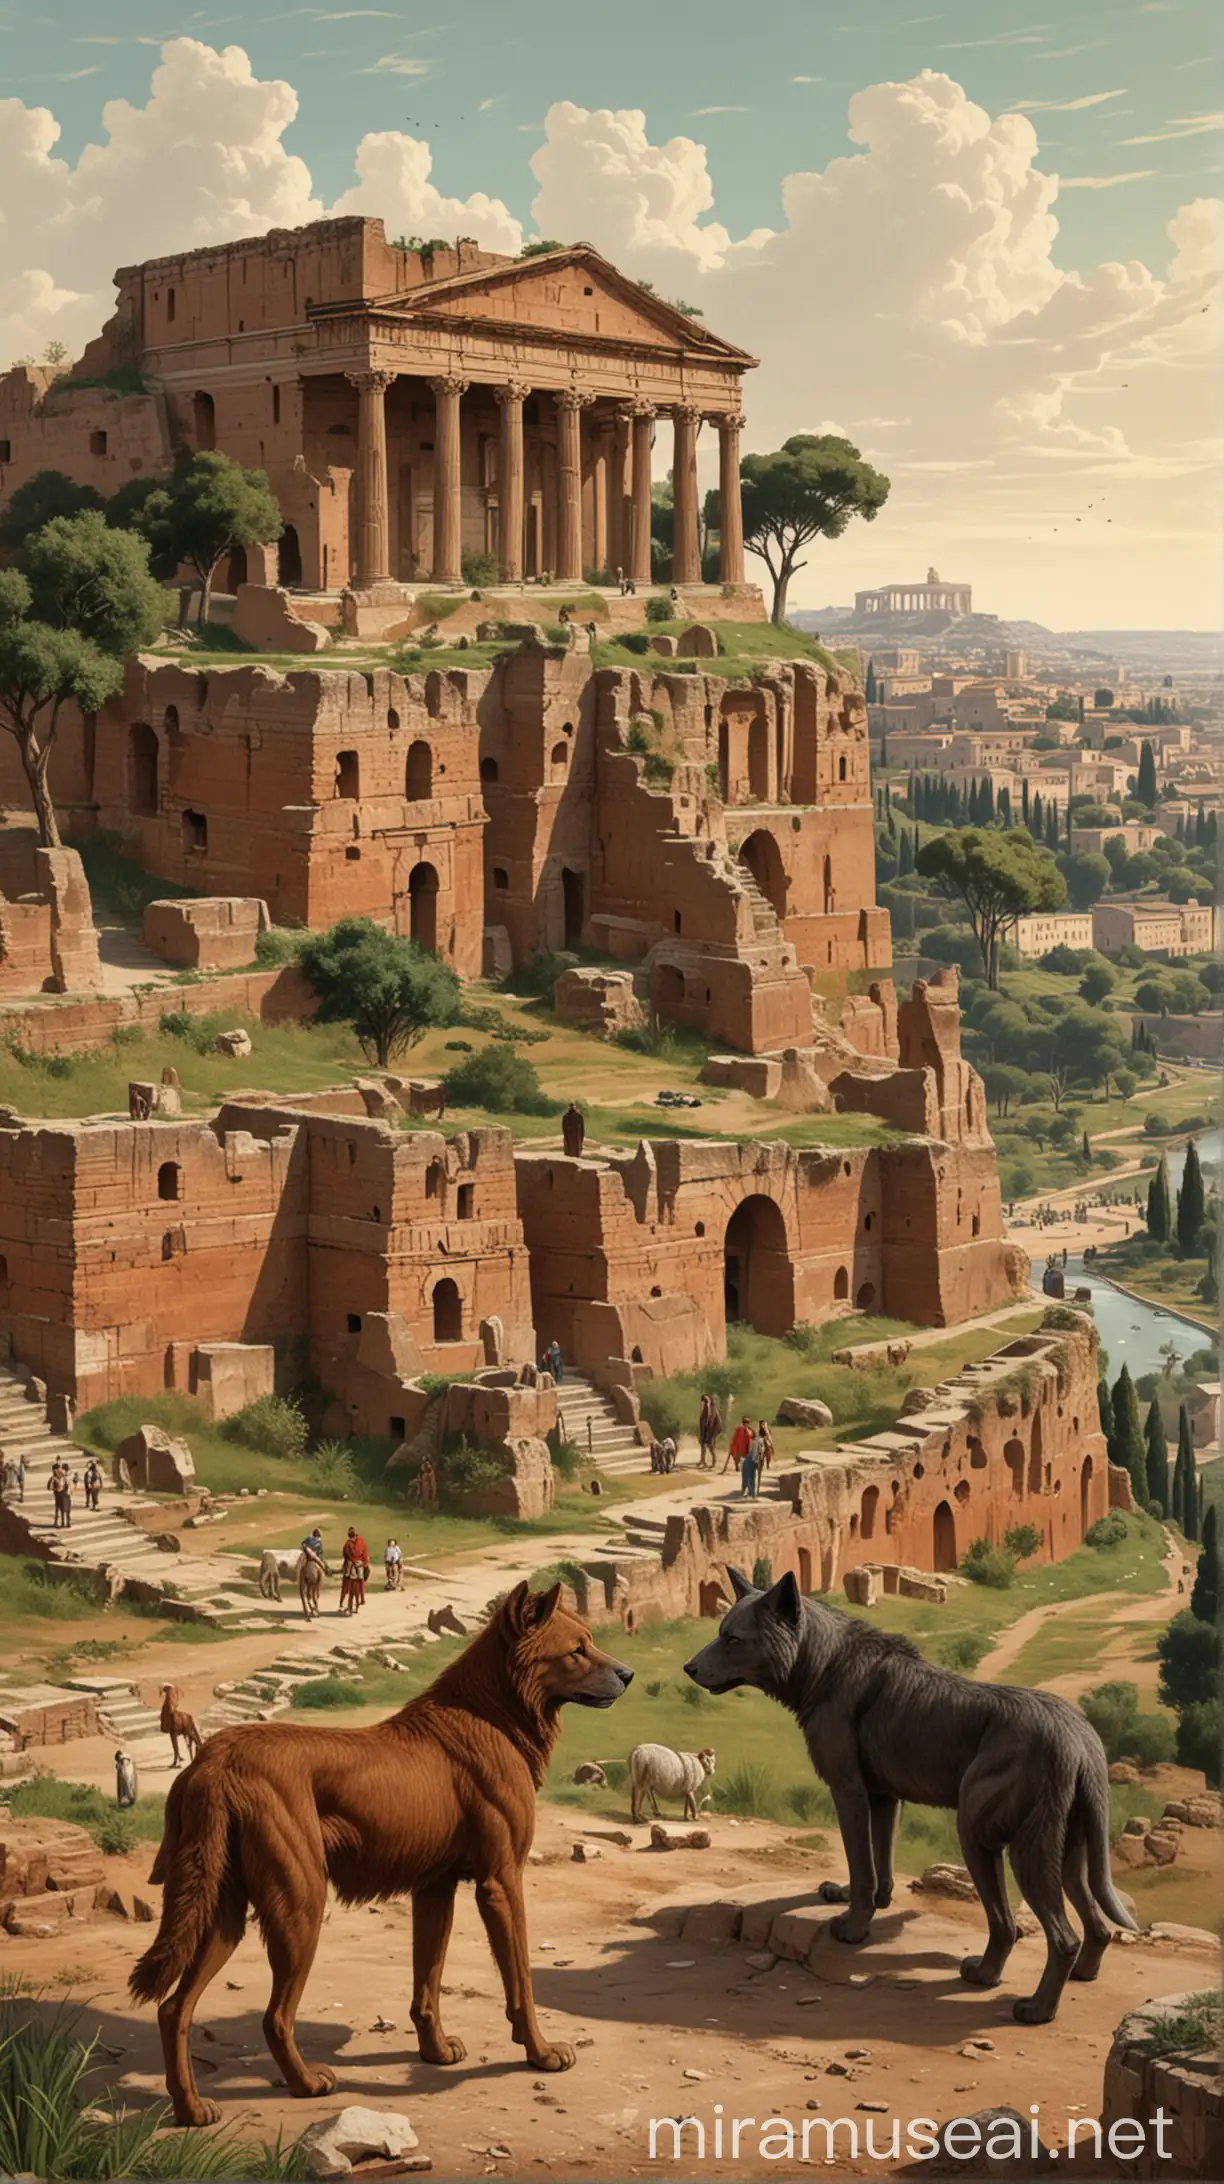 An illustration of Romulus and Remus standing in front of the Palatine Hill, with a small settlement in the background. hyper realistic